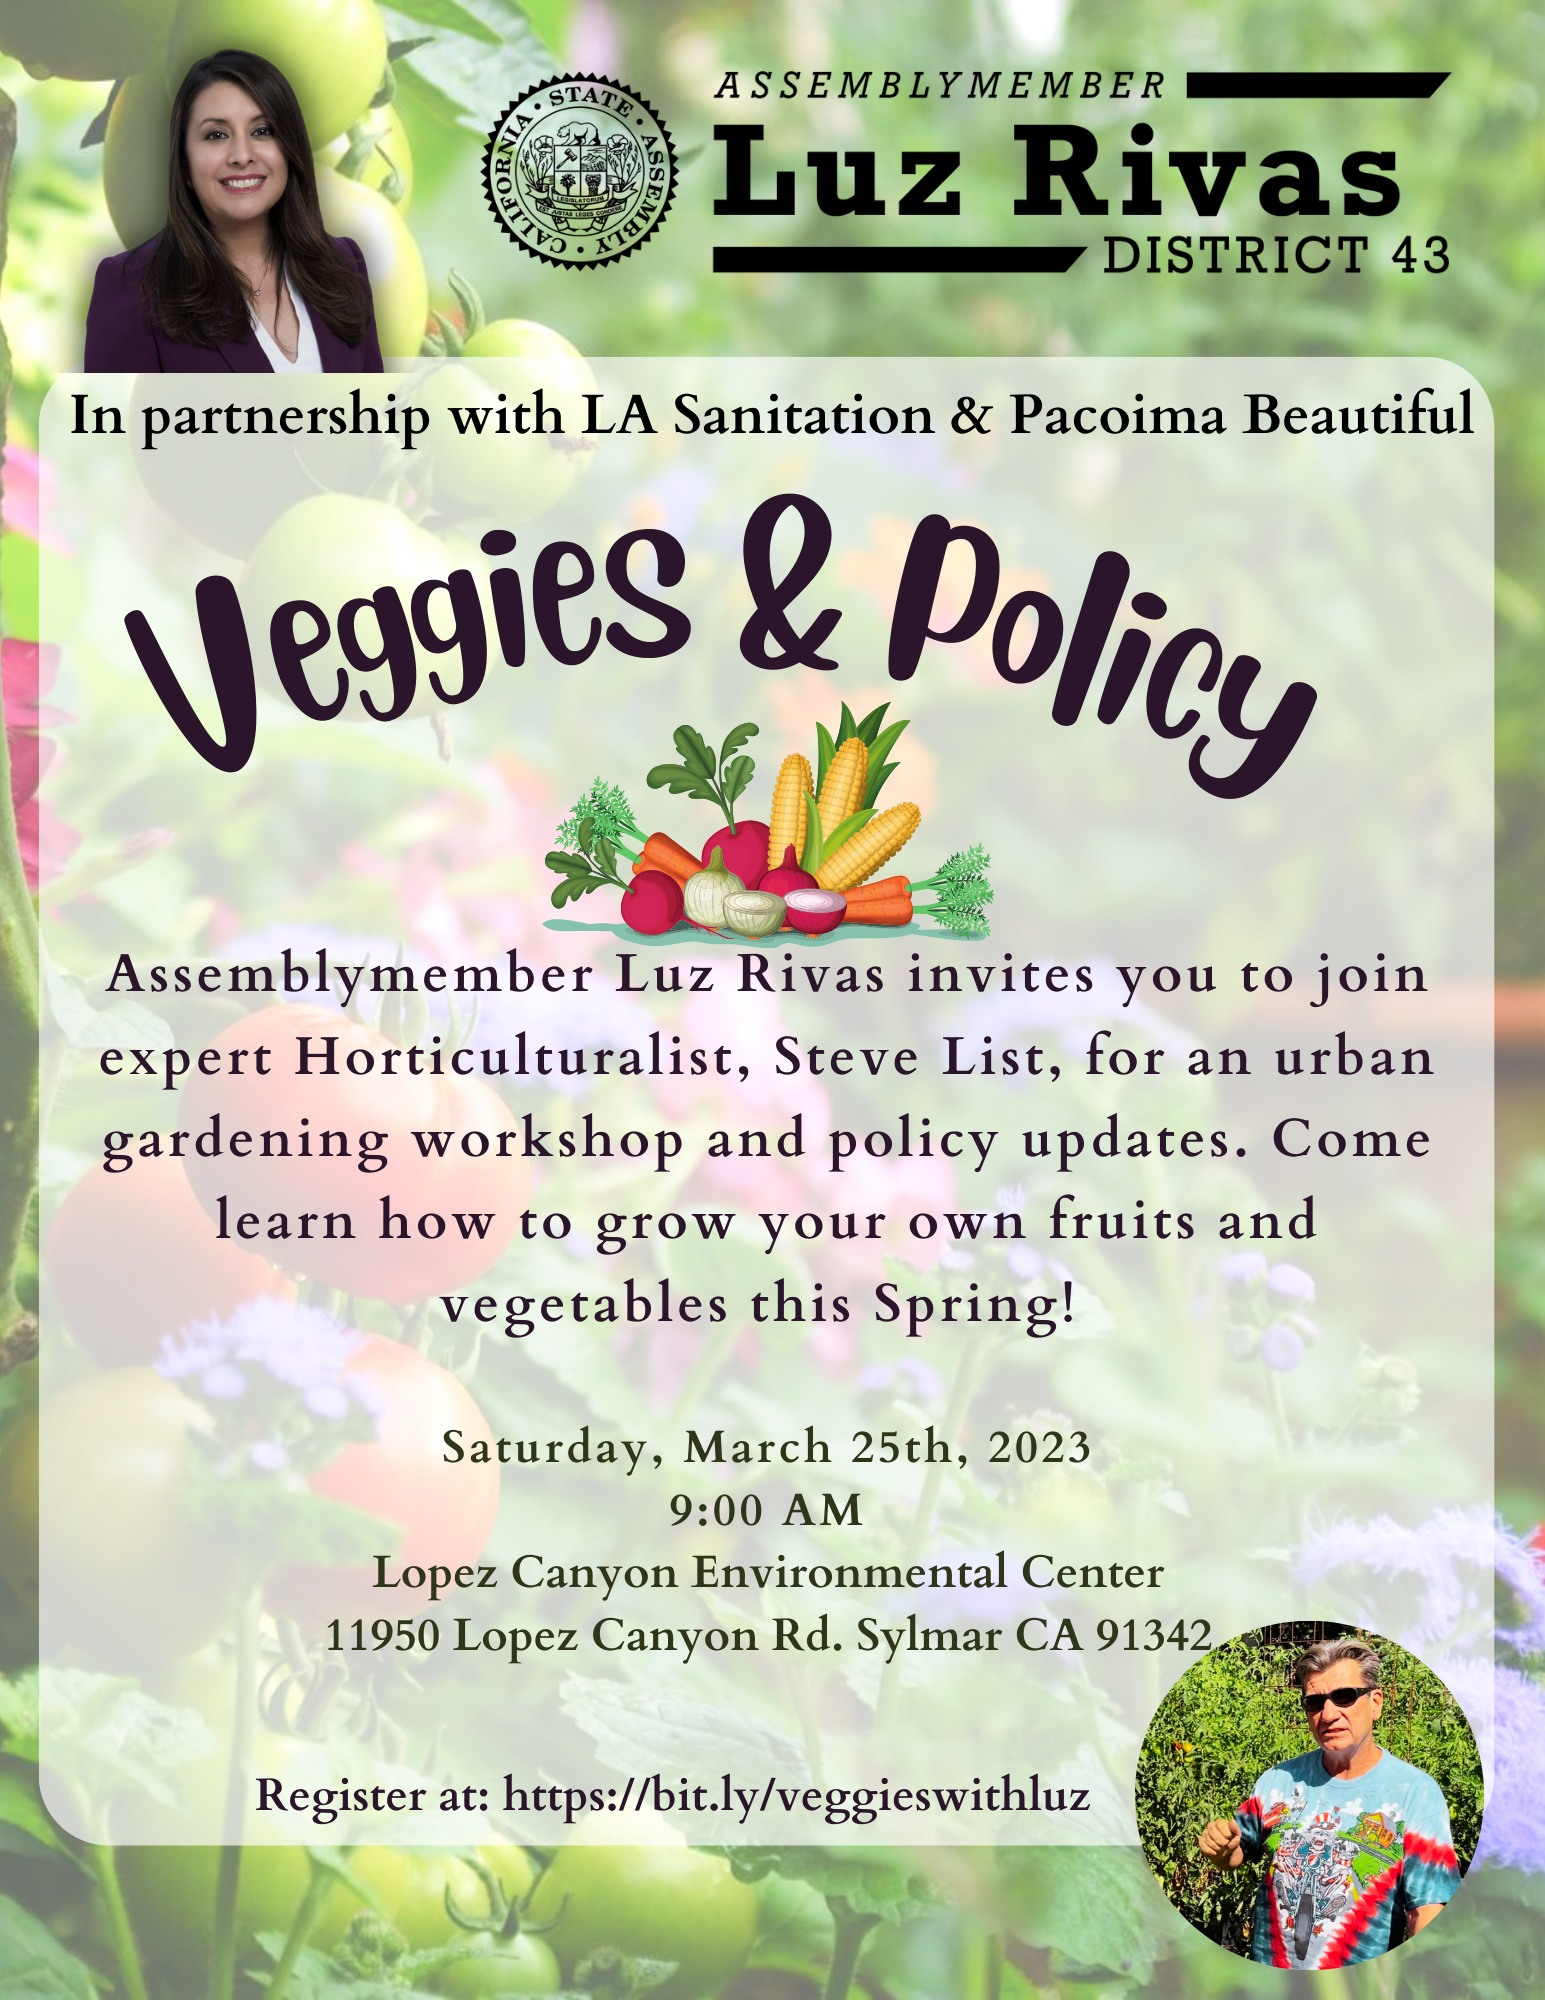 Please Join Me and Your Neighbors for a Morning that Blends DIY Urban Gardening